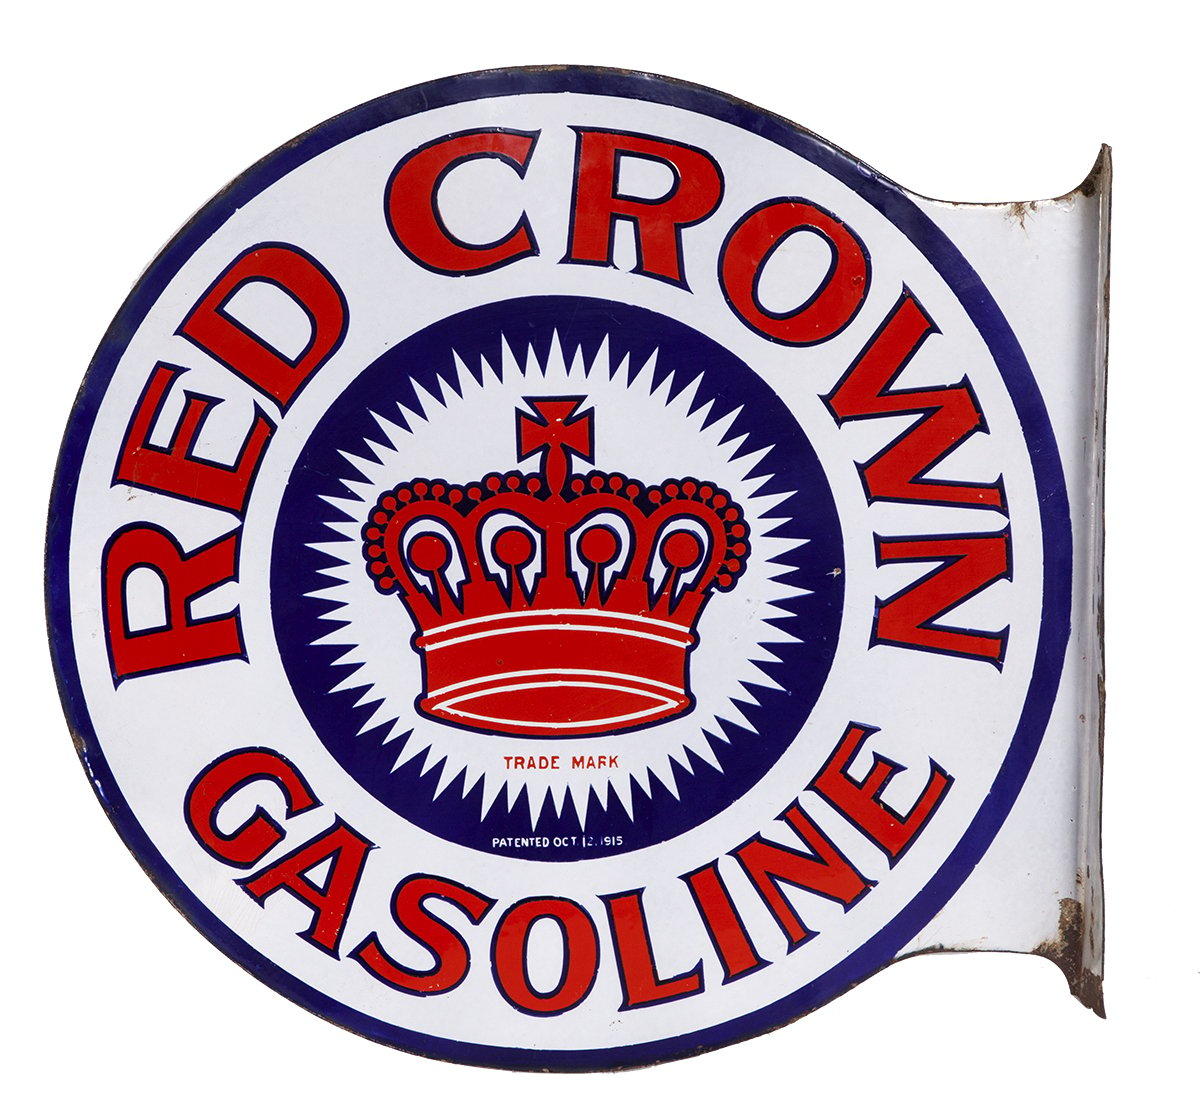 Red Crown  Gasoline from Advertising Signs on Custom Tee shirts .Zerolene 